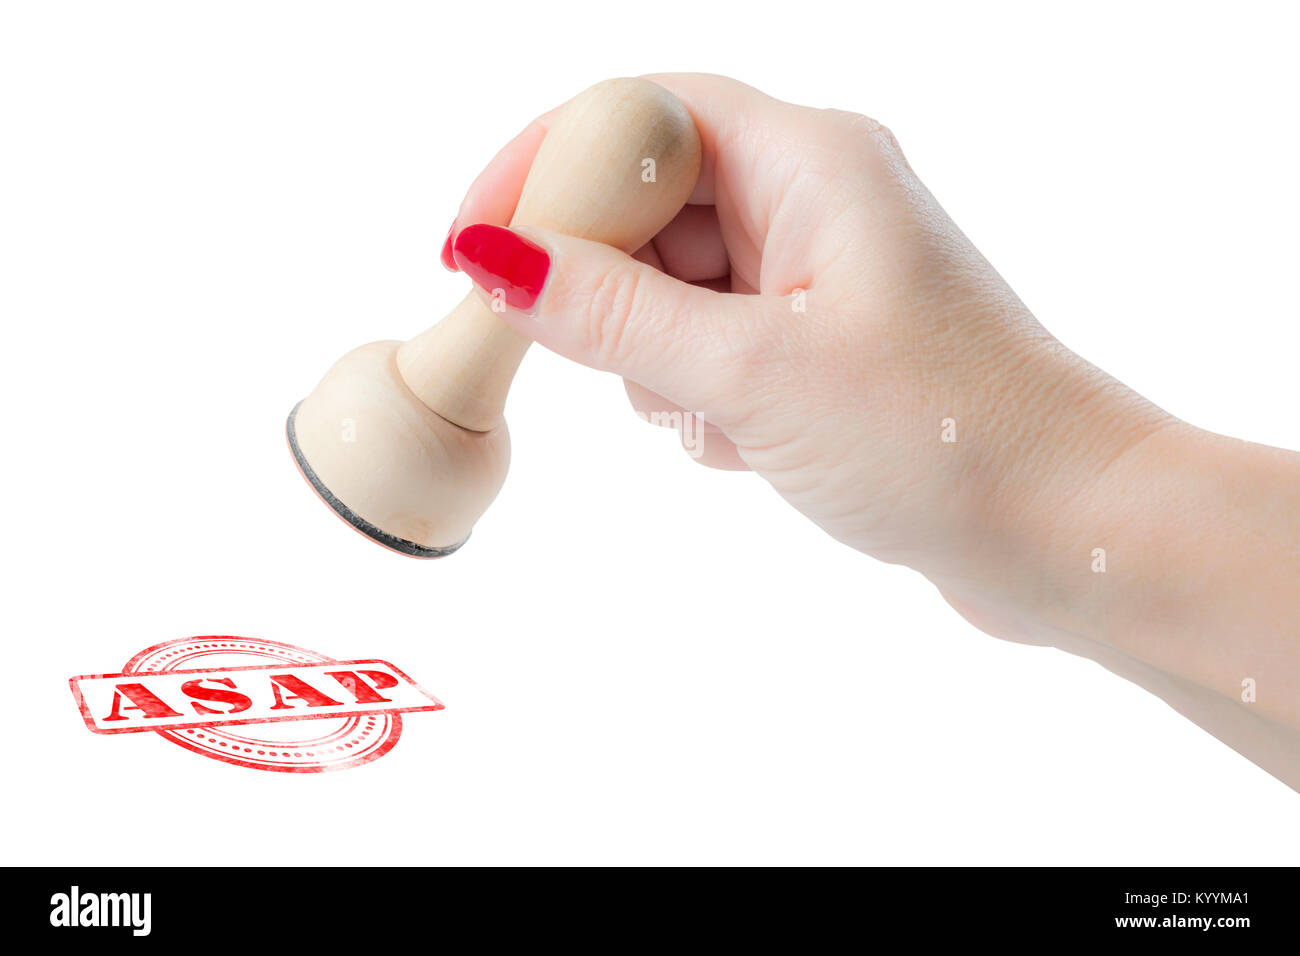 Hand holding a rubber stamp with the abbreviation asap, as soon as possible. isolated on a white background Stock Photo